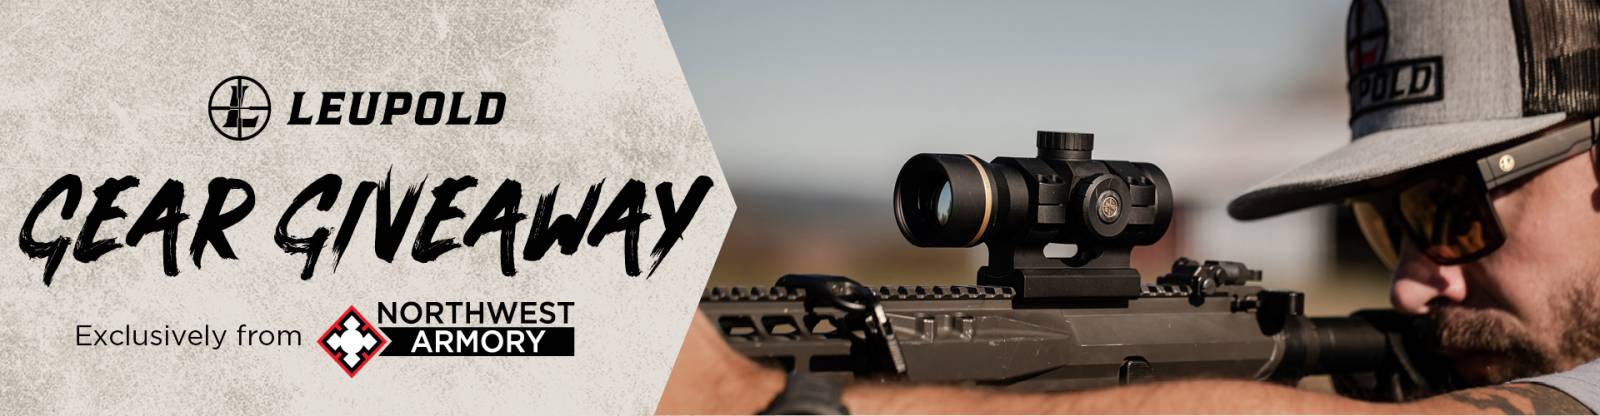 NW Armory Sweepstakes Landing Page 1